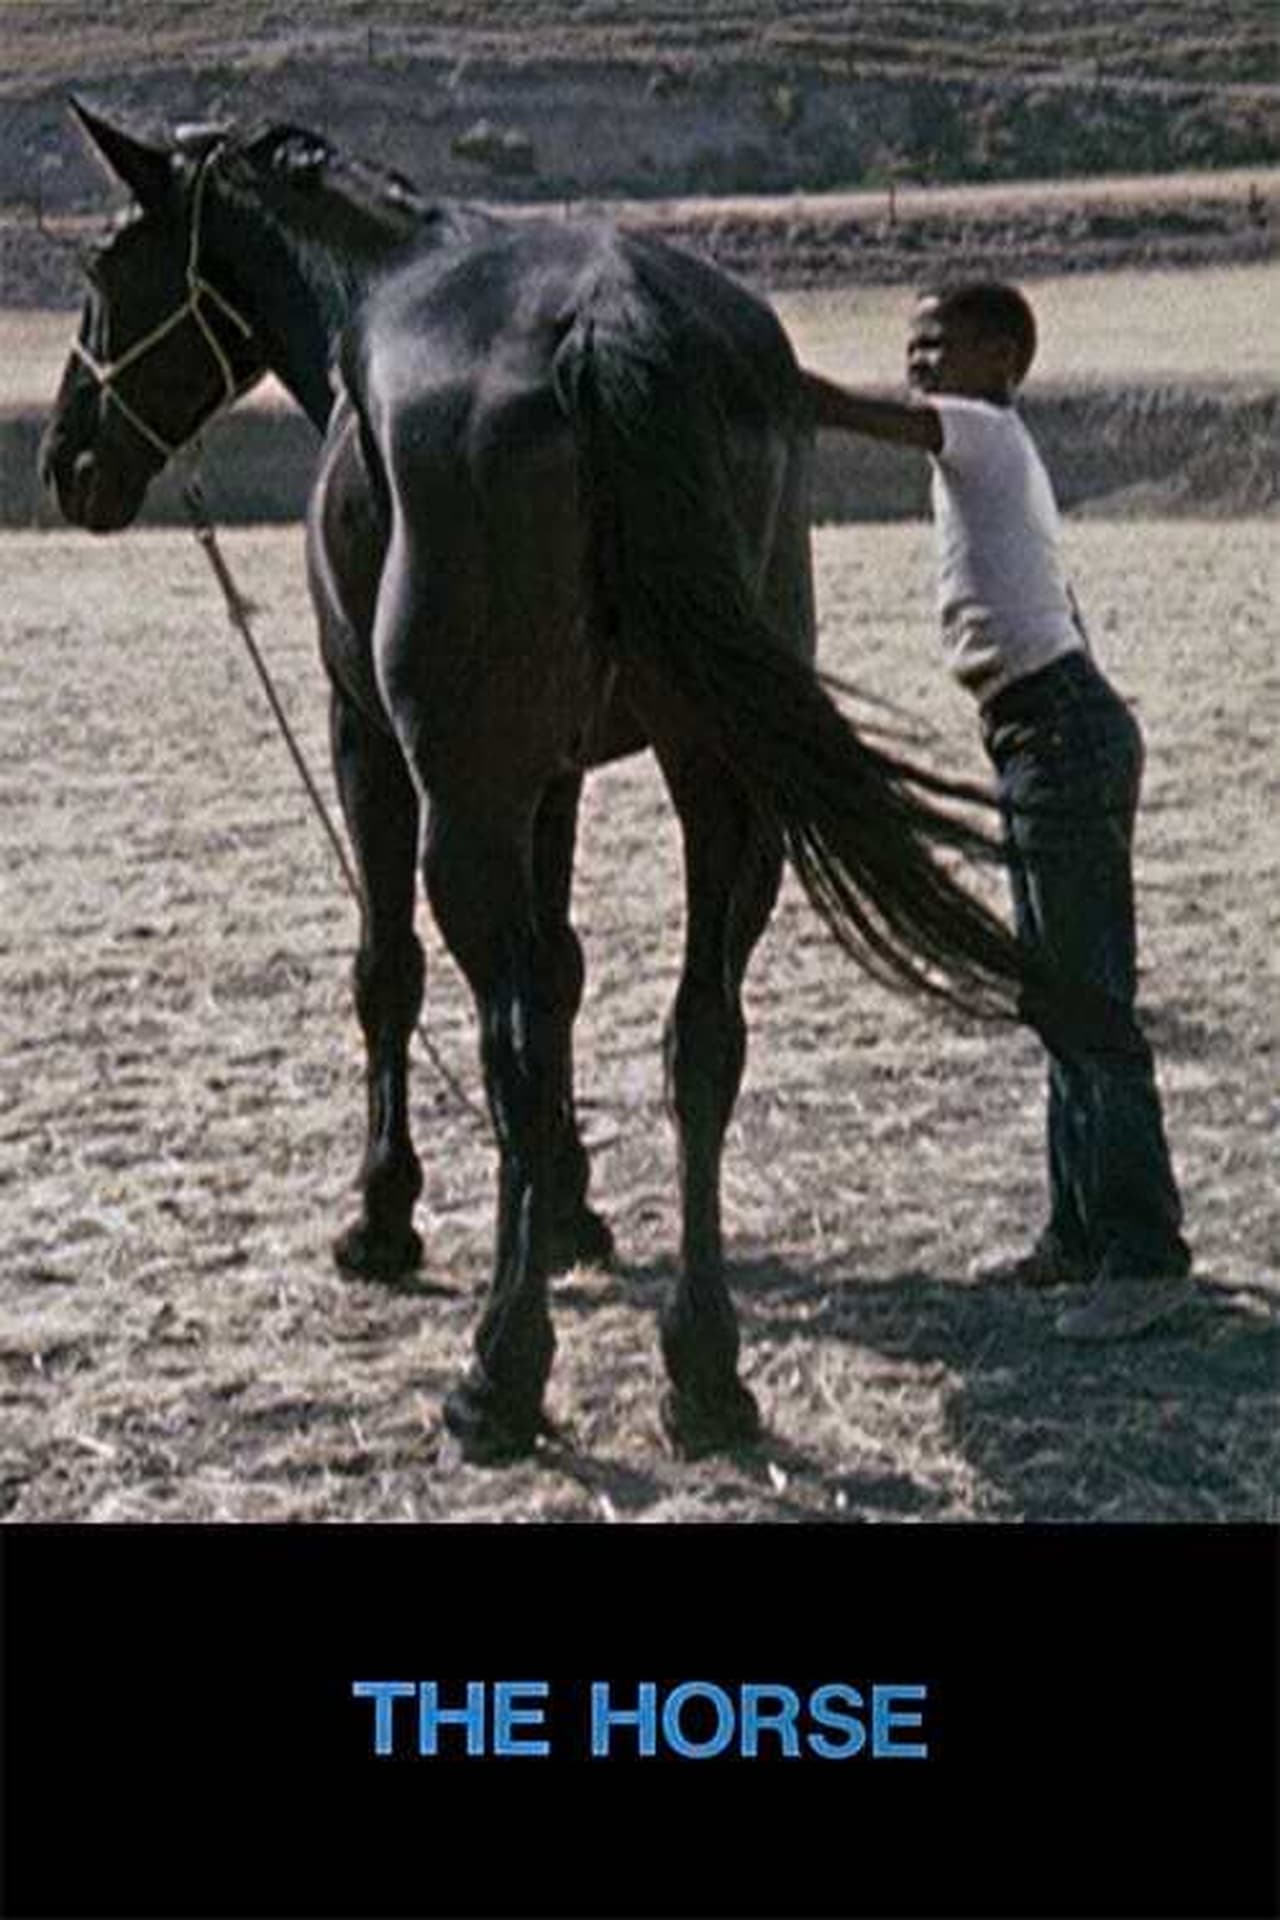 "The Horse" (1973)